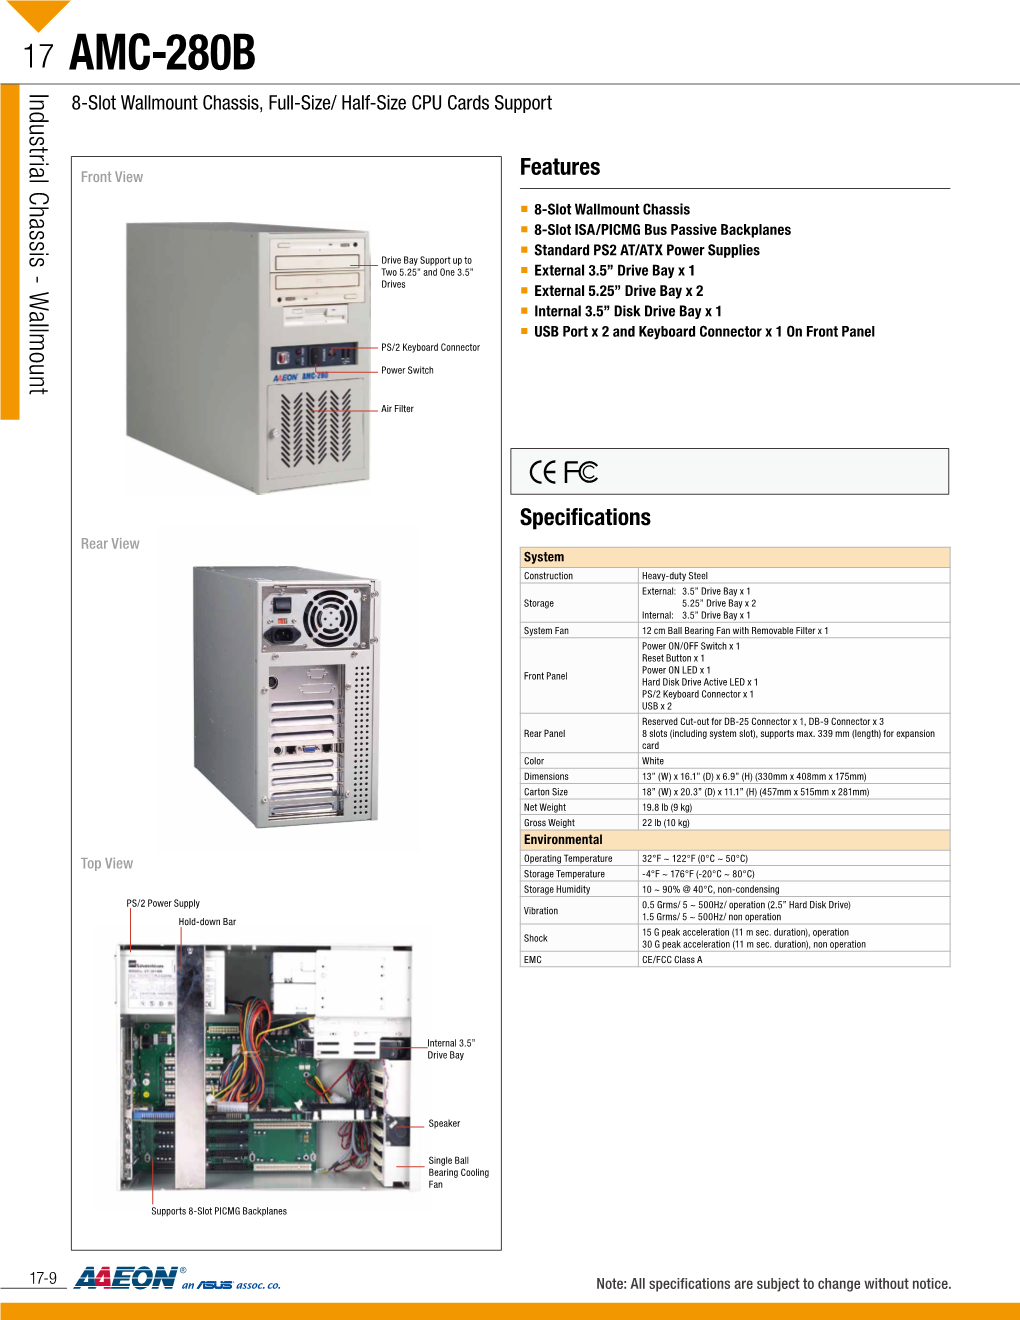 AMC-280B Industrial Chassis Wallmount - 8-Slot Wallmount Chassis, Full-Size/ Half-Size CPU Cards Support